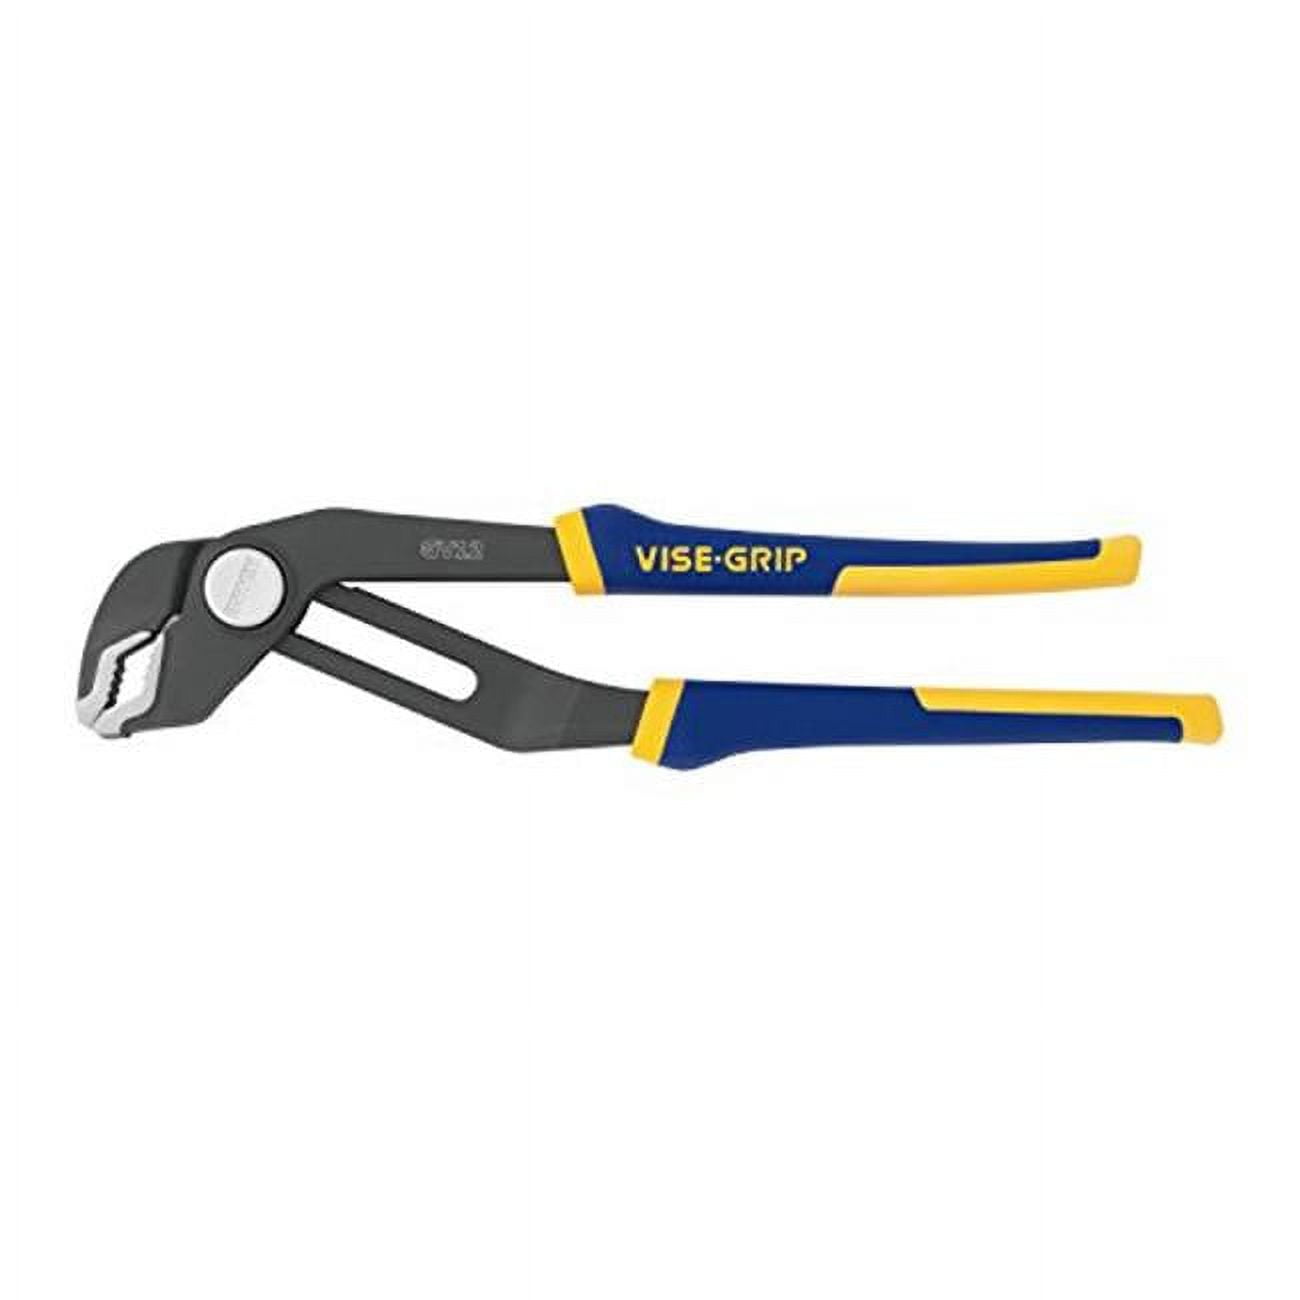 2078112 Groovelock Pliers, V-jaw